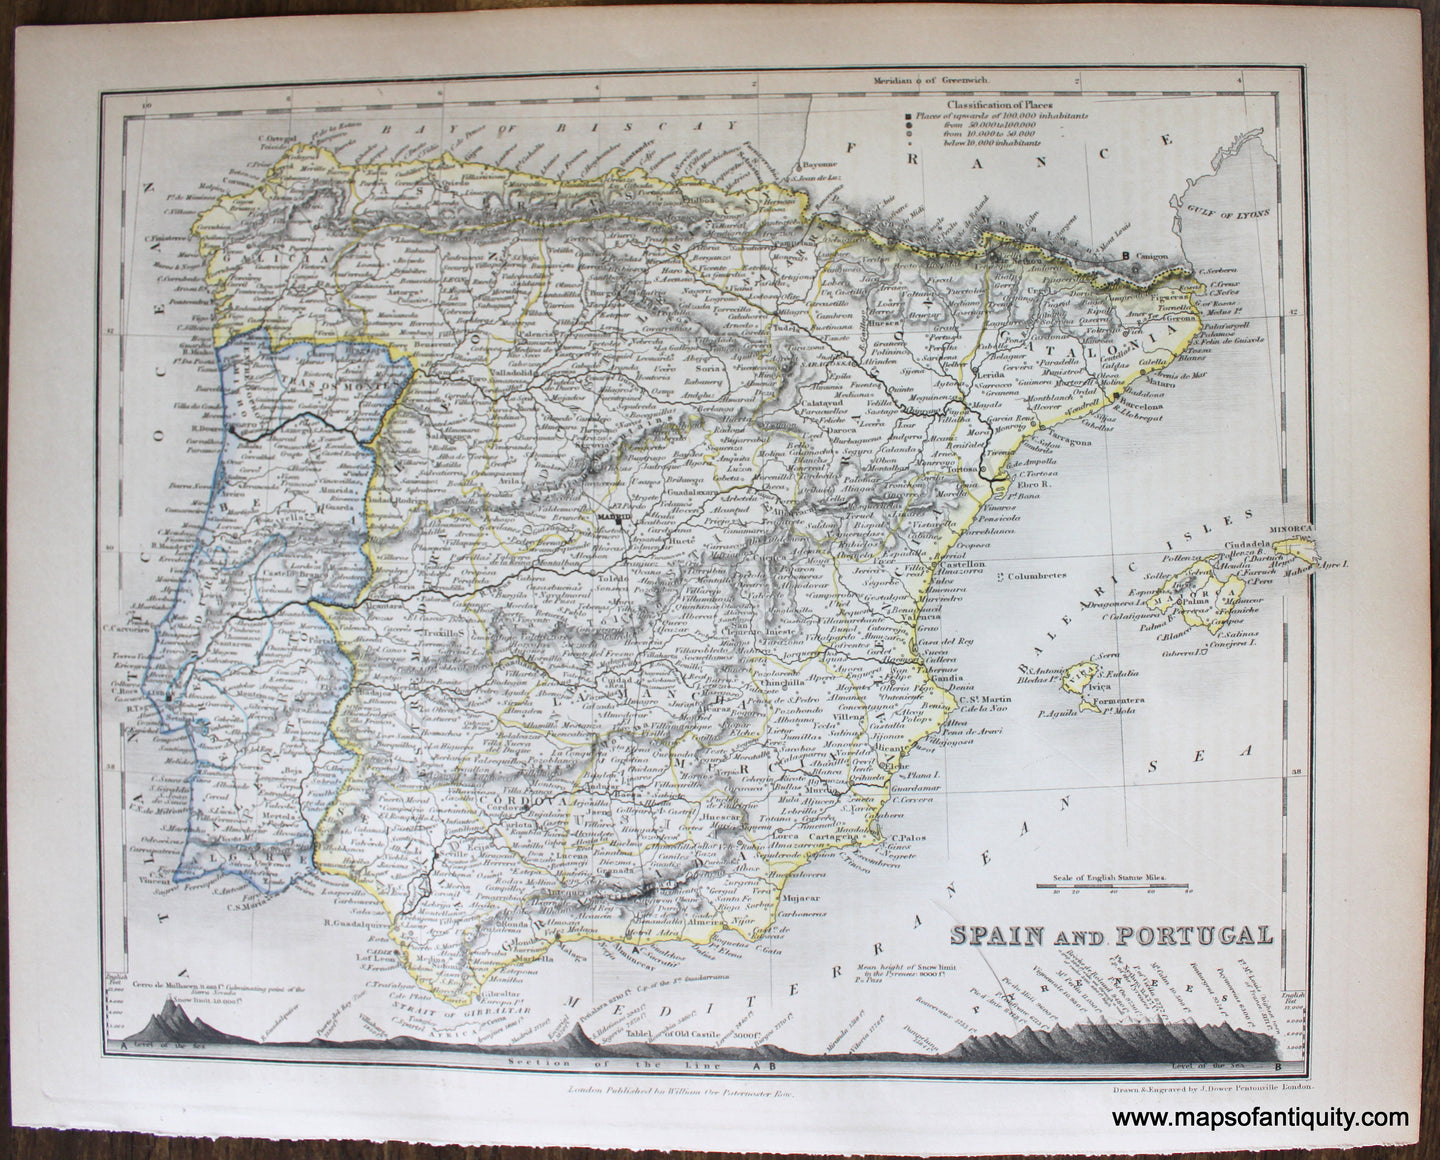 Genuine-Antique-Map-Spain-and-Portugal-Europe-Spain-&-Portugal-1850-Petermann-/-Orr-/-Dower-Maps-Of-Antiquity-1800s-19th-century